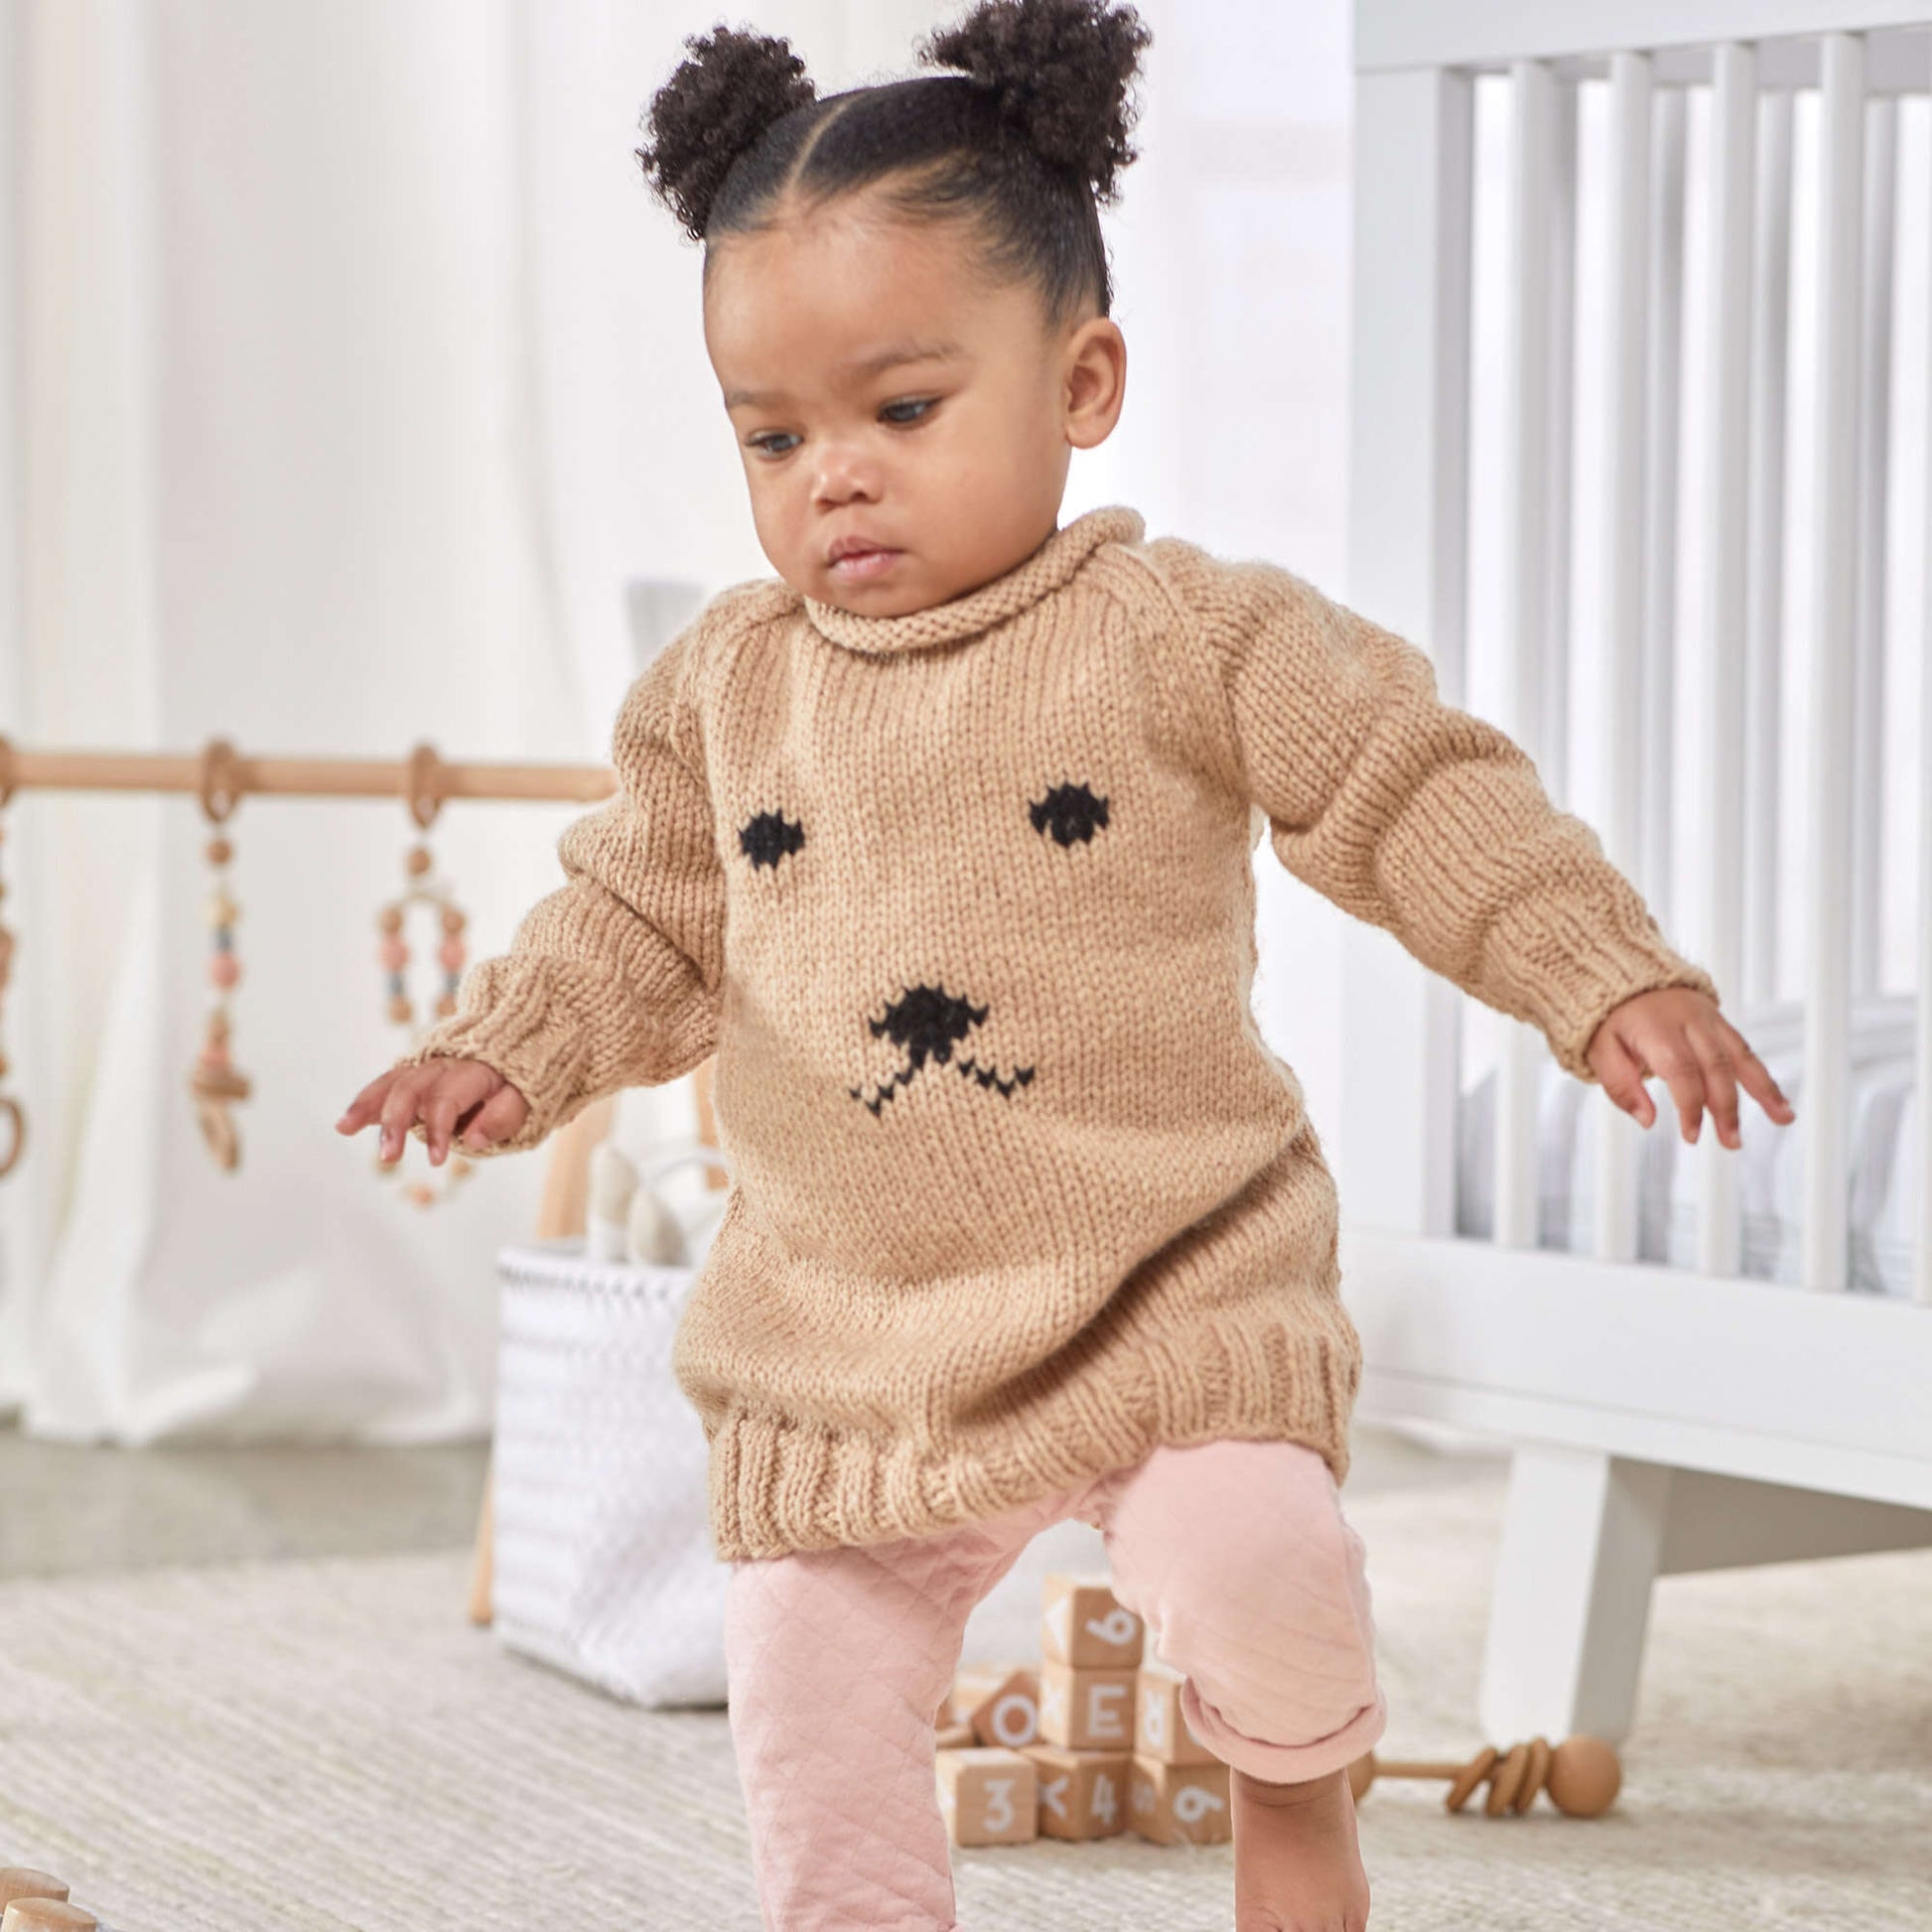 Free Red Heart Knit Huggable Puppy Baby Dress Pattern